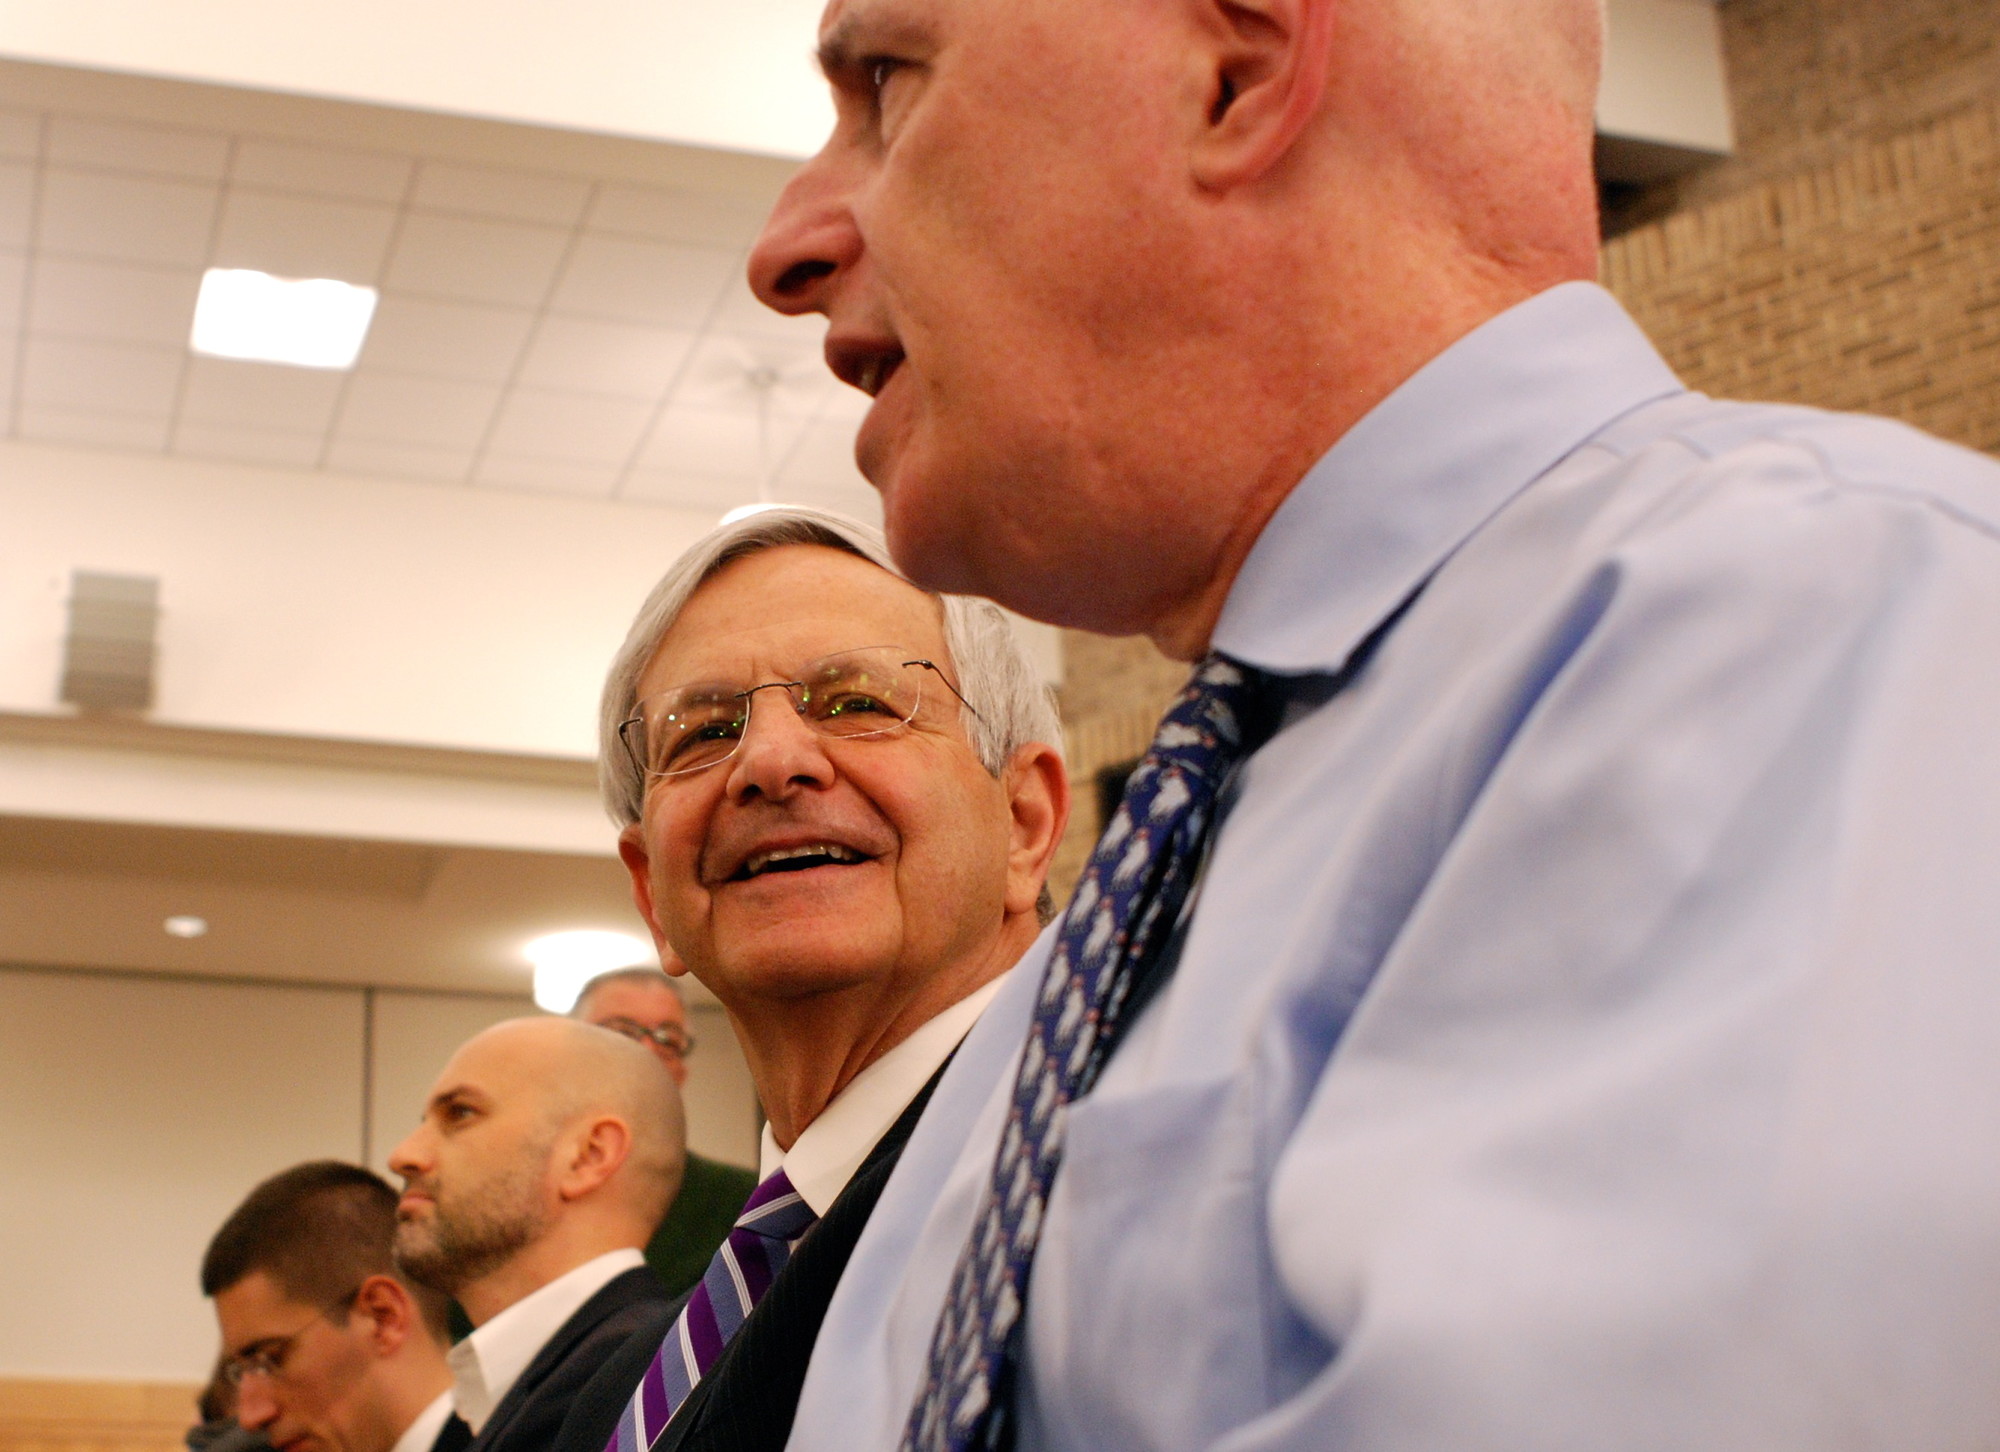 In the audience were Richard Guardino, left, executive dean of Hofstra’s Wilbur F. Breslin Center for Real Estate Studies, and a former Town of Hempstead supervisor, and Dr. Richard Himelfarb, a political science professor.